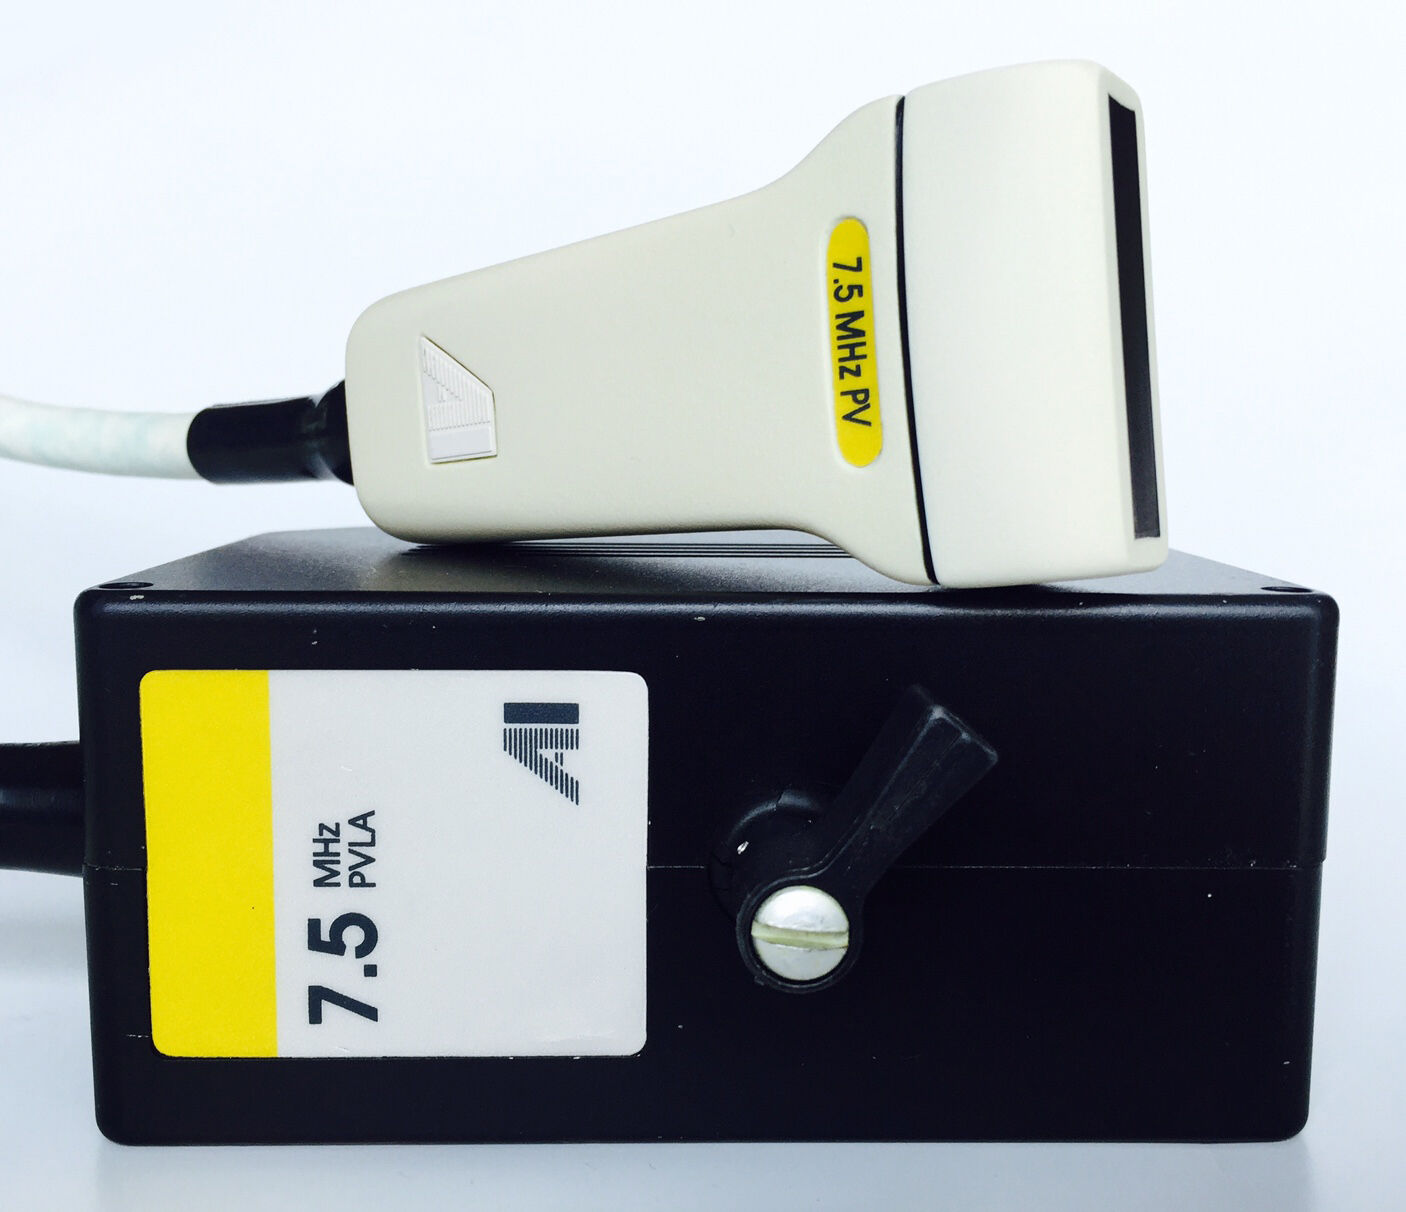 ACOUSTIC IMAGING PVLA 7.5 MHz. ULTRASOUND TRANSDUCER PROBE Used ~ full-tested DIAGNOSTIC ULTRASOUND MACHINES FOR SALE